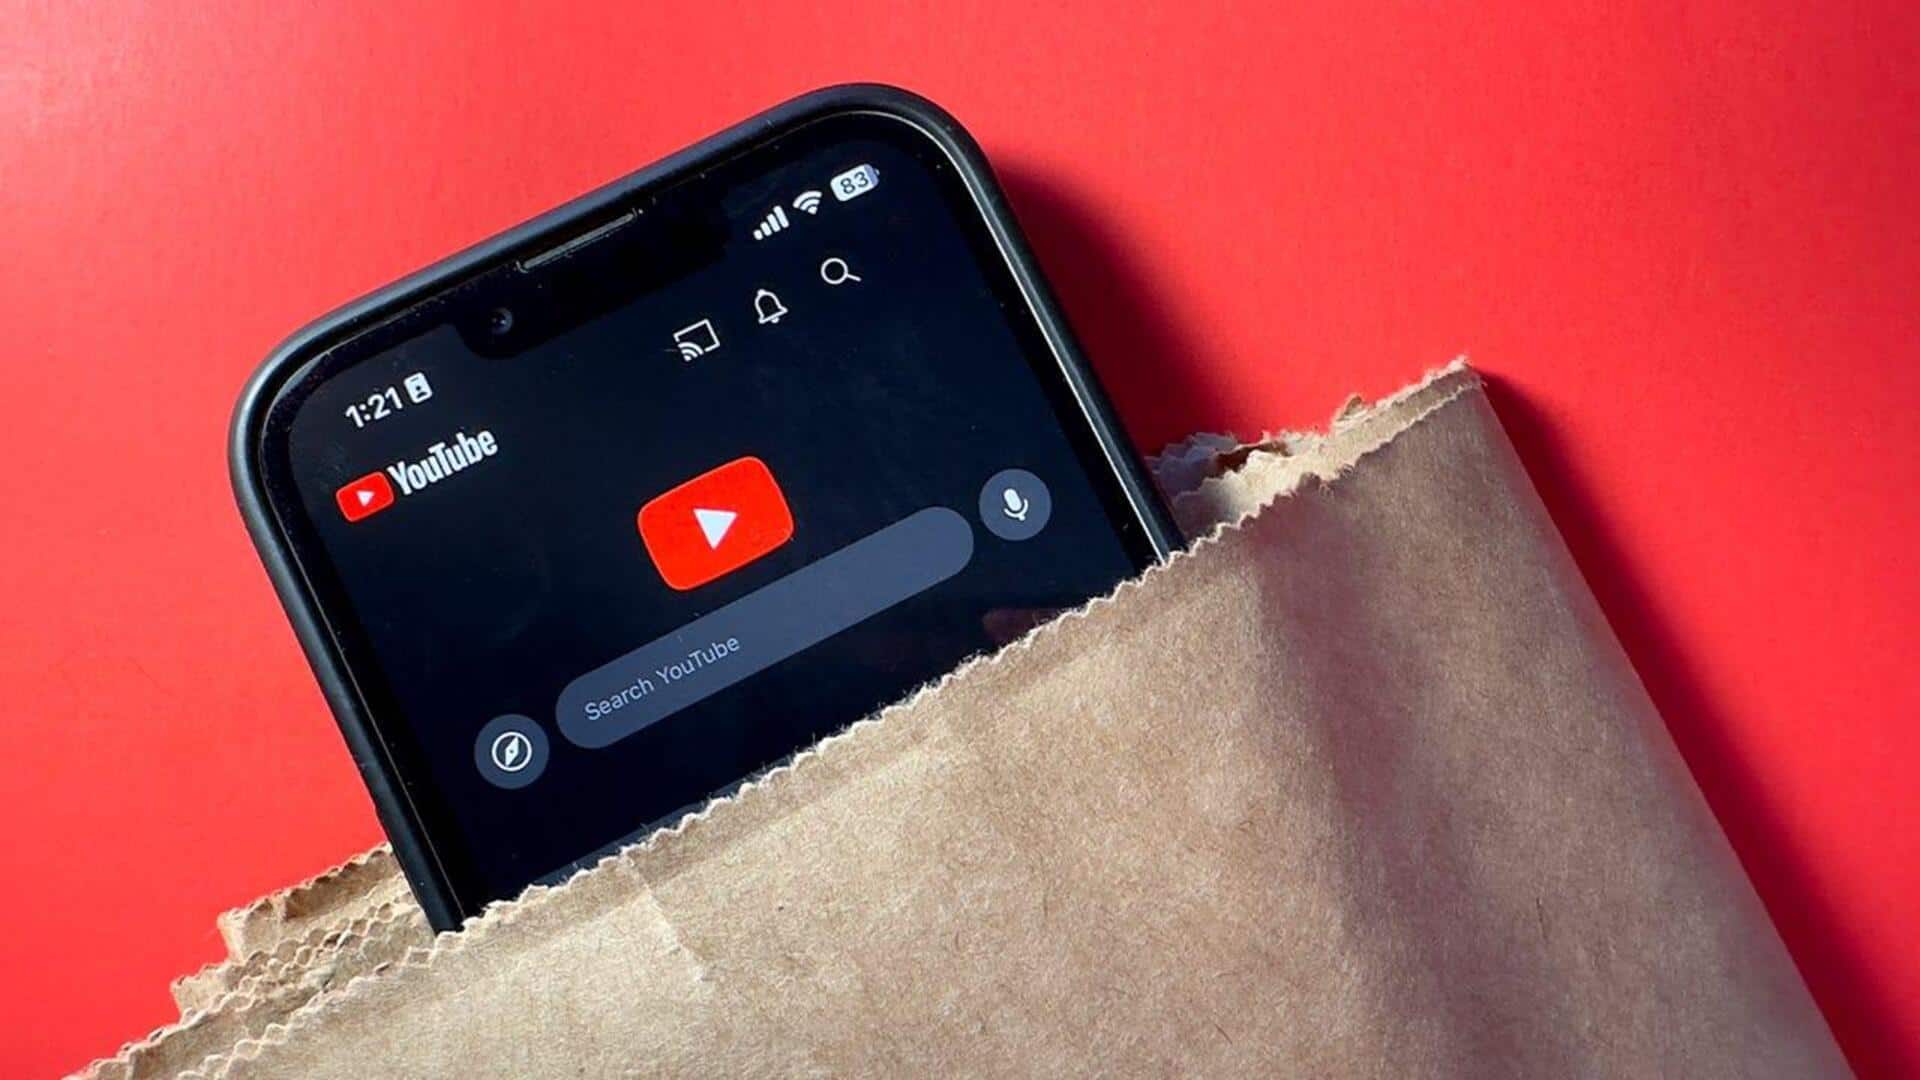 YouTube Premium users can now watch Shorts while checking emails